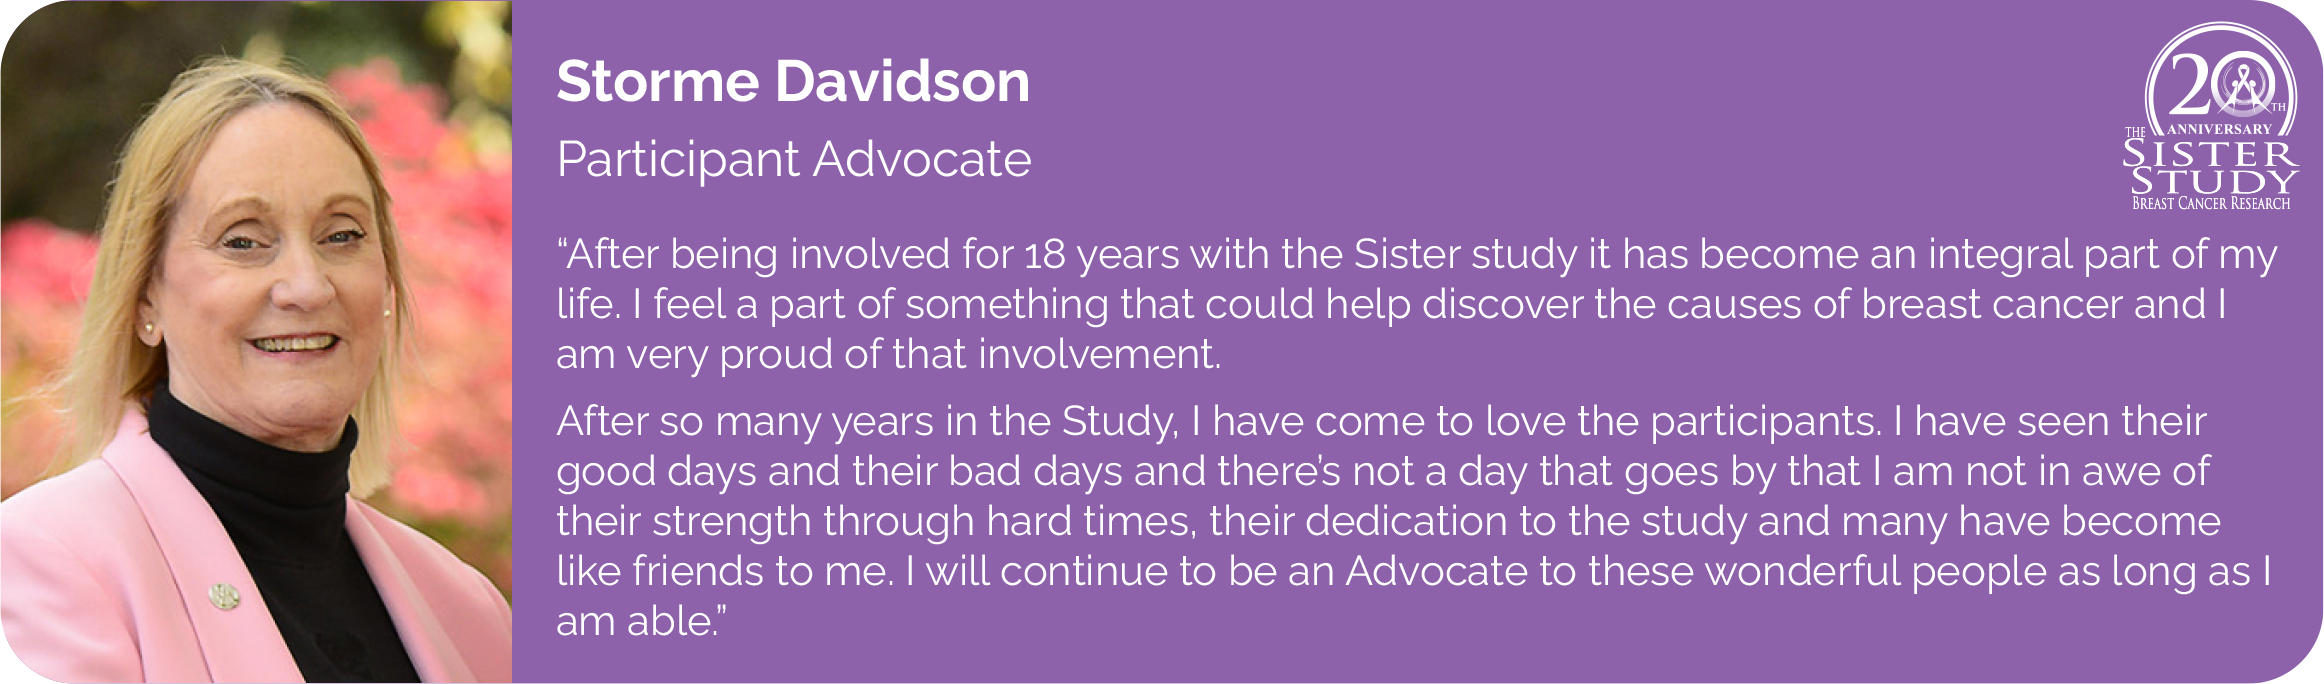 Storme Davidson
Participant Advocate
- After being involved for 18 years with the Sister study it has become an integral part of my life. I feel a part of something that could help discover the causes of breast cancer and I am very proud of that involvement.
After so many years in the Study, I have come to love the participants. I have seen their good days and their bad days and theres not a day that goes by that I am not in awe of
their strength through hard times, their dedication to the study and many have become like friends to me. I will continue to be an Advocate to these wonderful people as long as I am able.